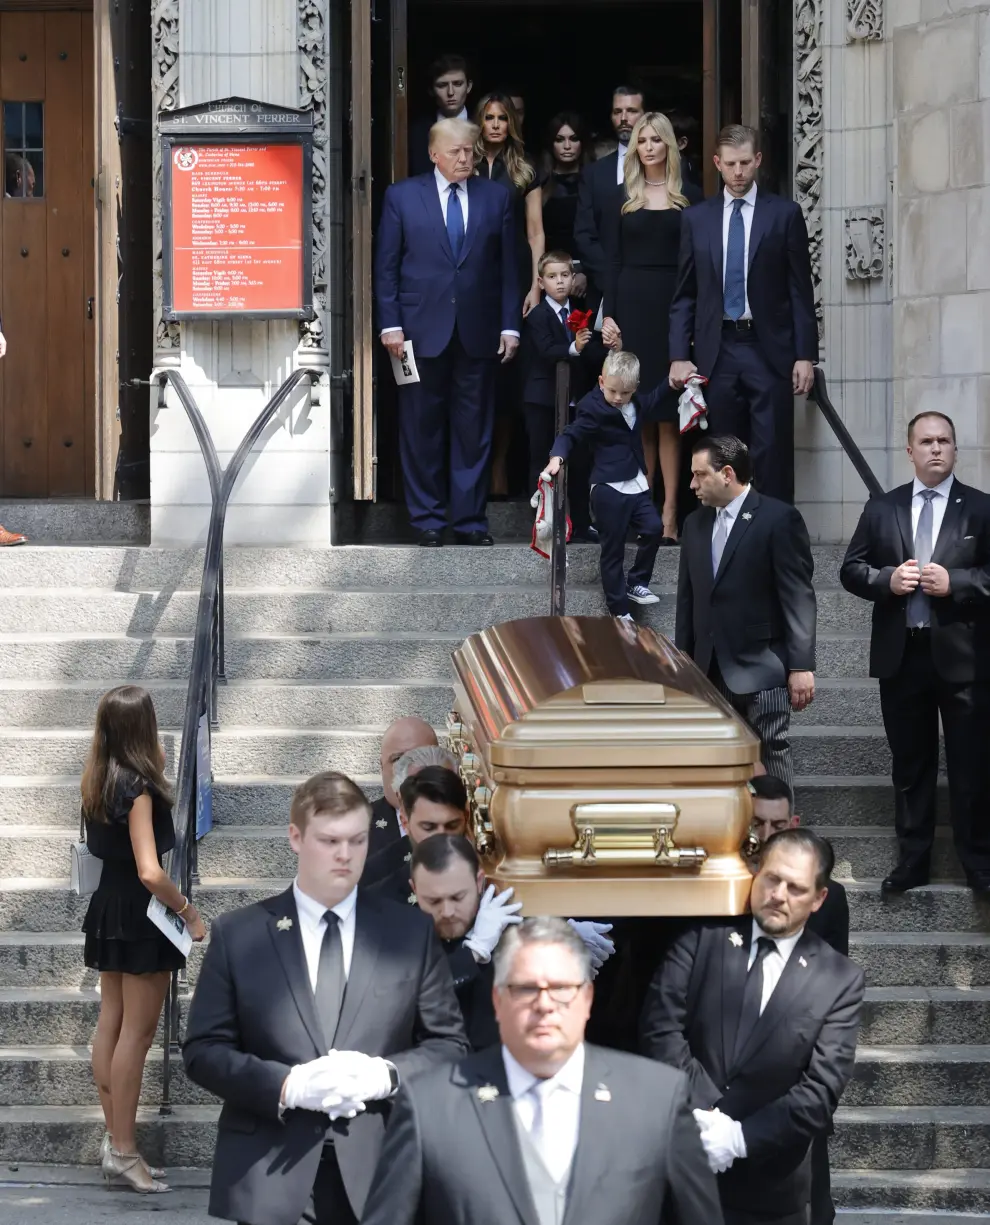 Former U.S. President Donald Trump, his wife Melania, Kimberly Guilfoyle, his sons Barron and Donald Jr. and his daughter Ivanka leave St. Vincent Ferrer Church during the funeral of Ivana Trump, socialite and Trump's first wife, in New York City, U.S., July 20, 2022.  REUTERS/Brendan McDermid PEOPLE-IVANA TRUMP/FUNERAL